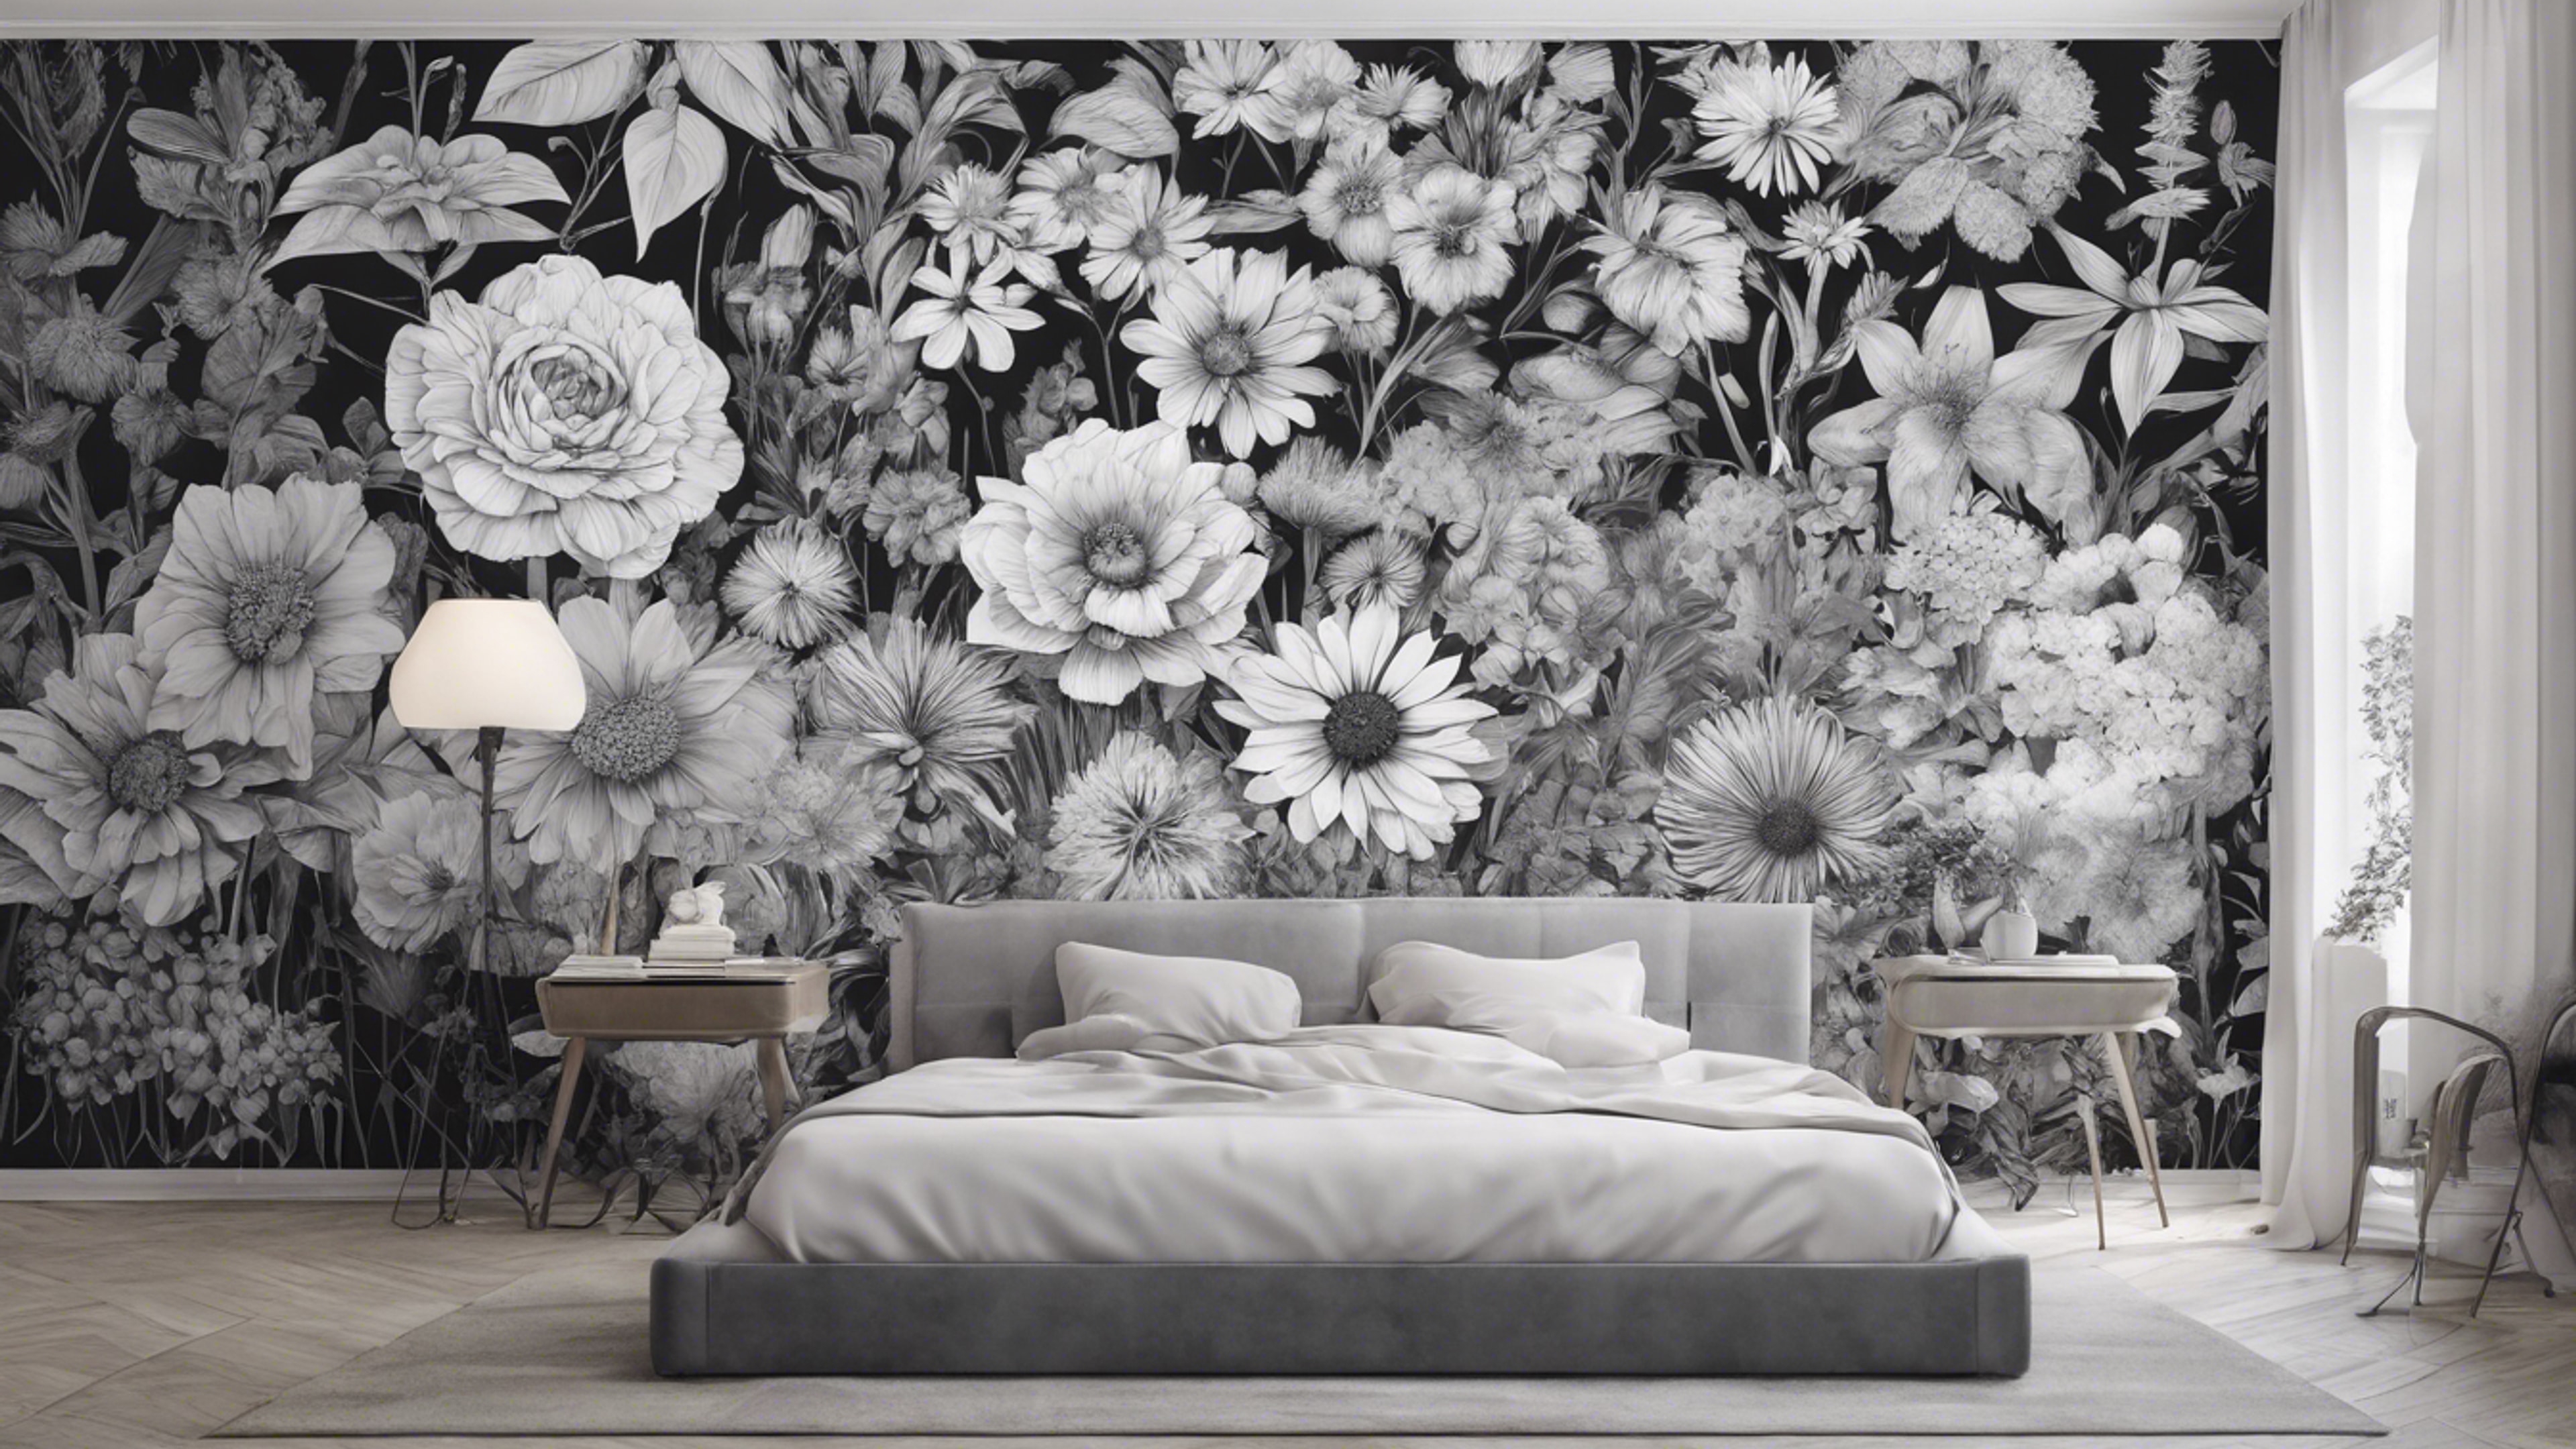 A monochrome floral mural, with designs inspired by classic botanical illustrations.壁紙[d96bb6e7280248ebbc3c]